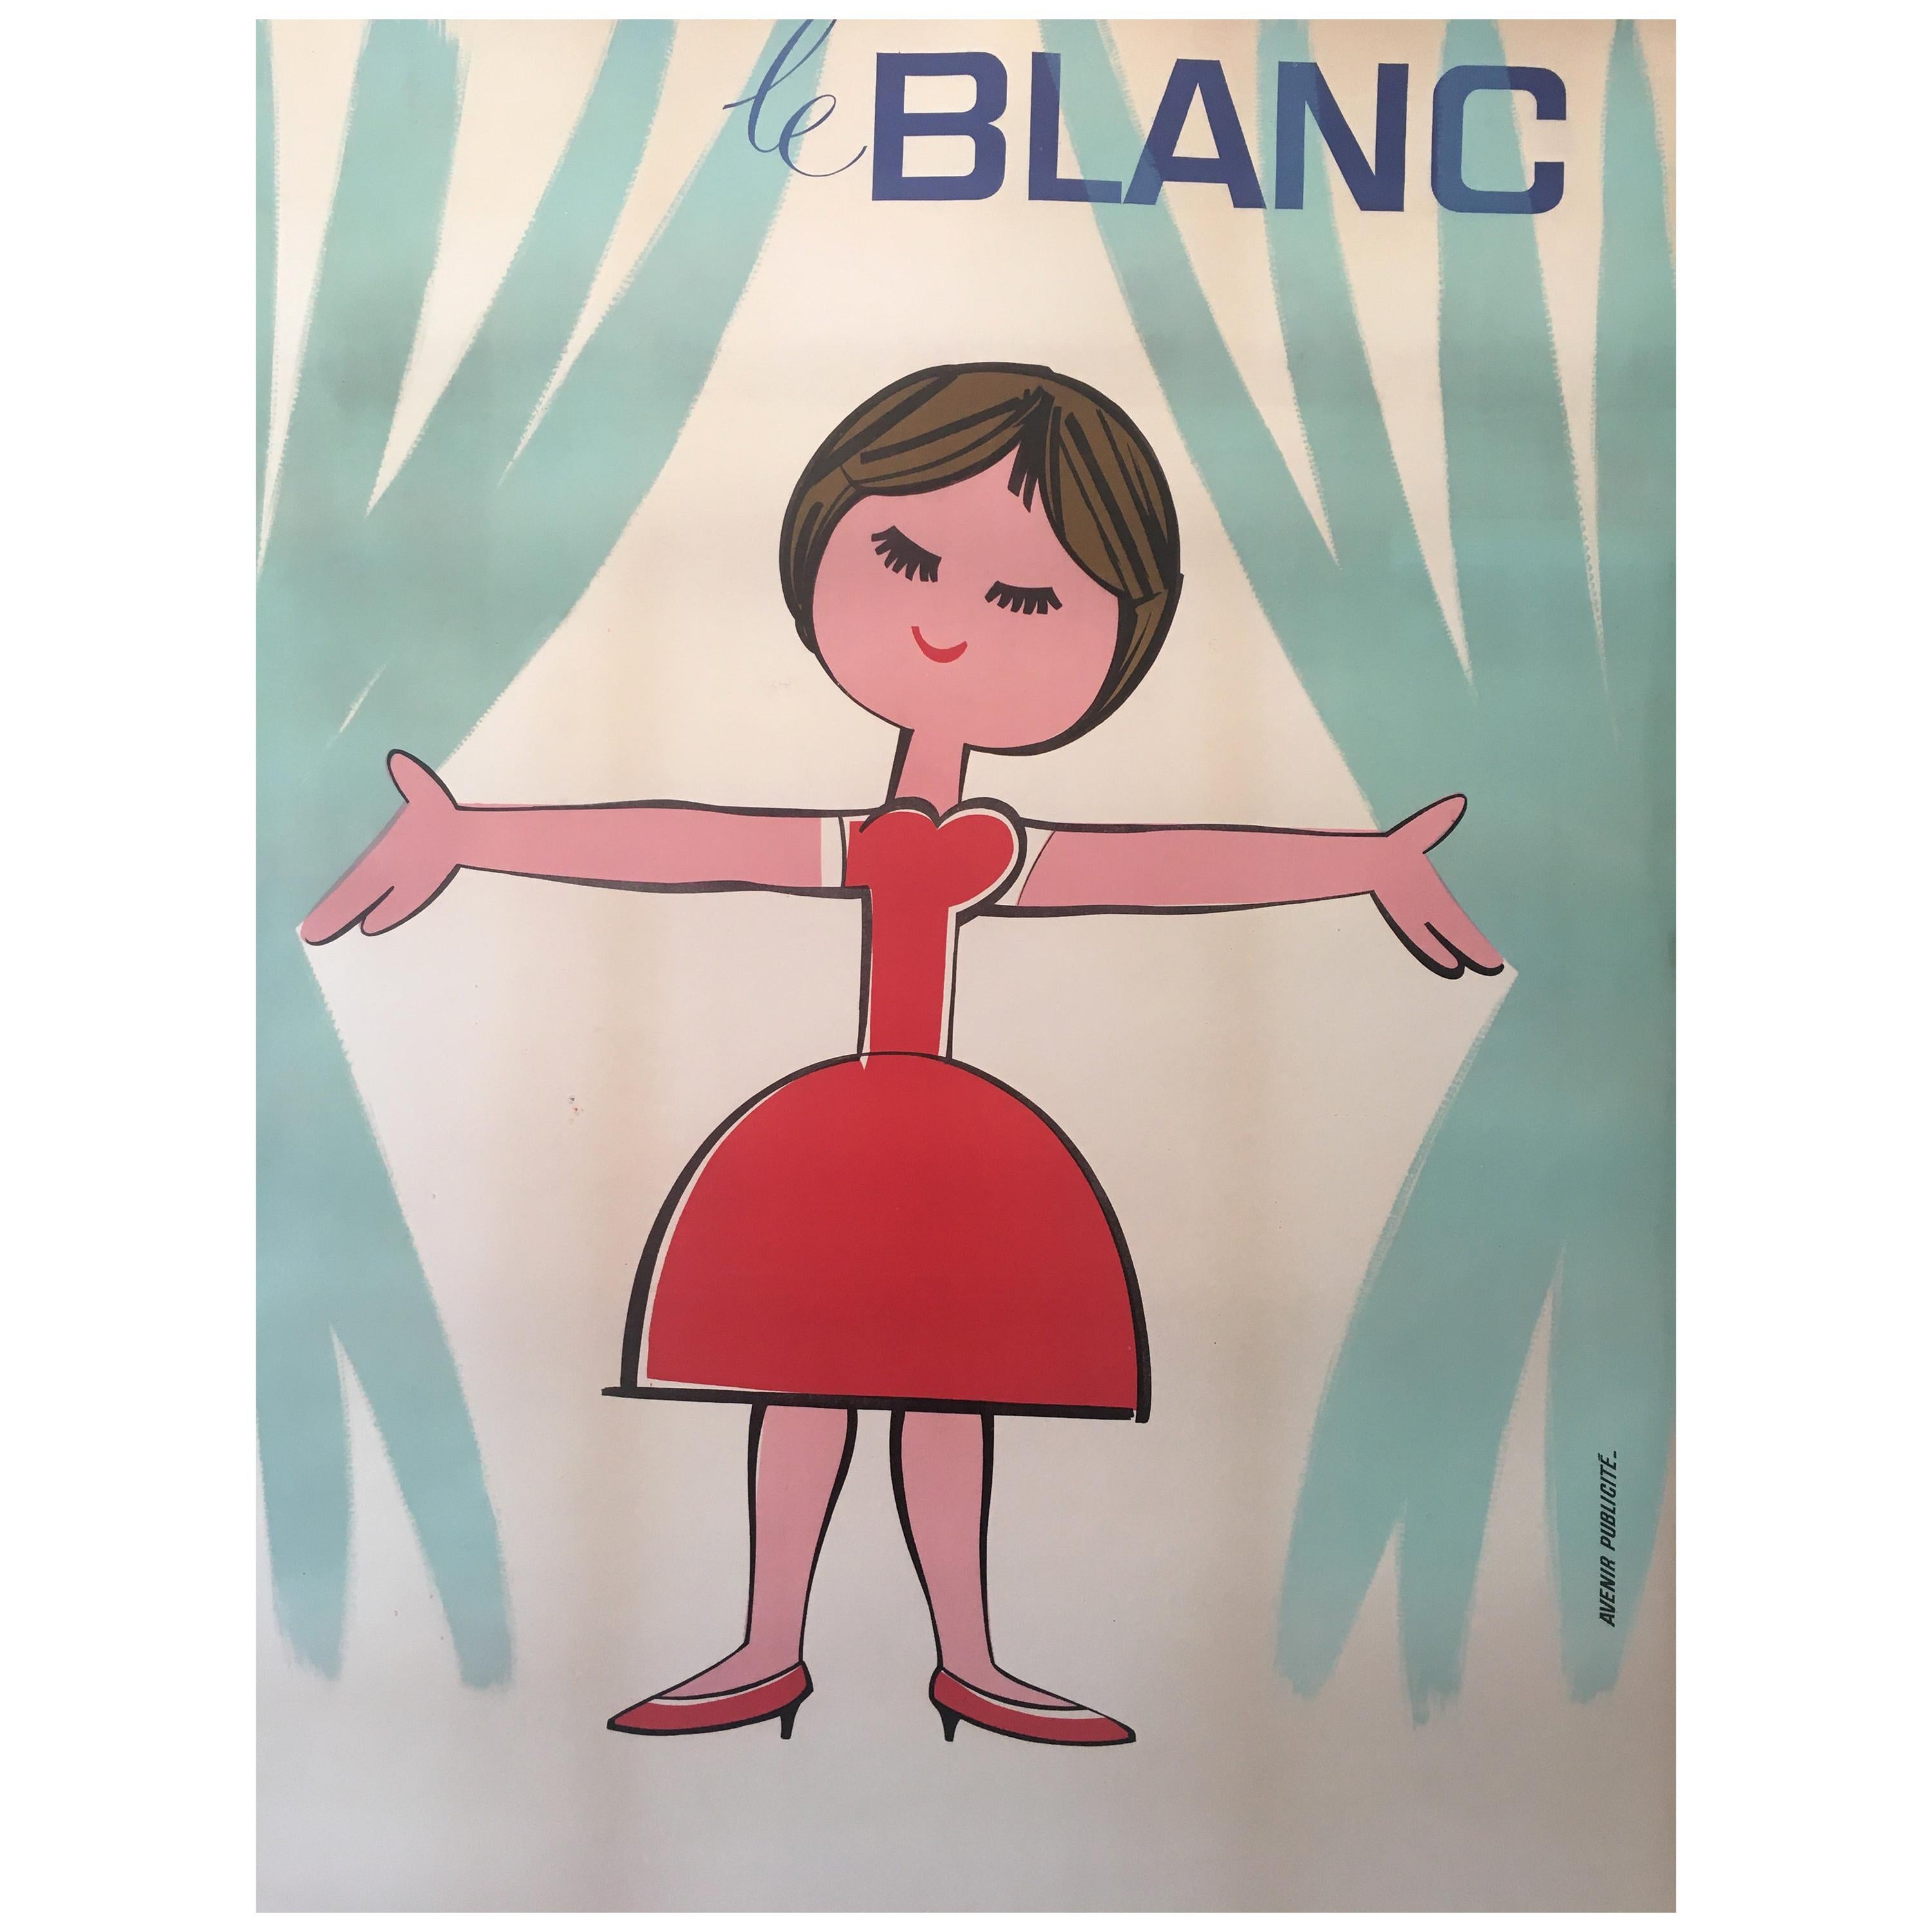 Original Vintage French 1950s Advertising Poster, 'Le Blanc'